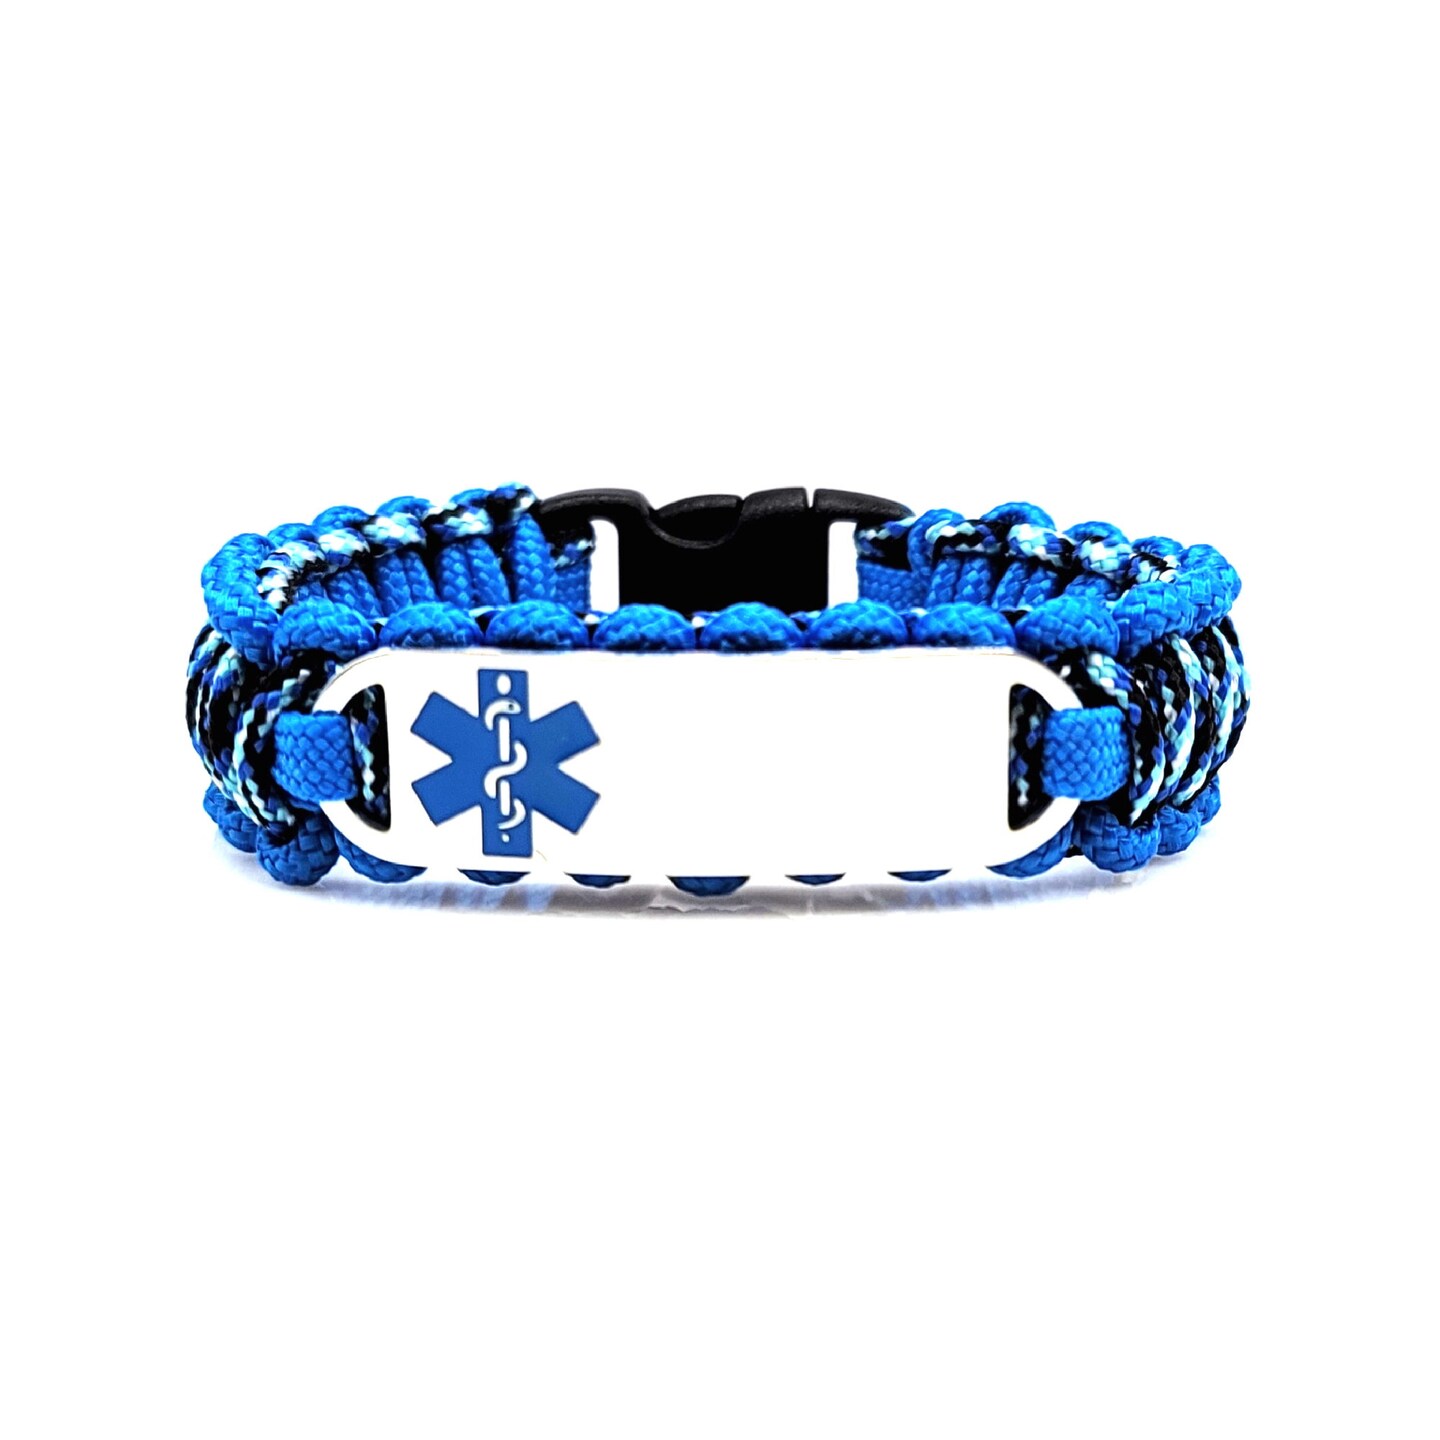 Kids Thin 275 Paracord Medical ID Bracelet with Personalized